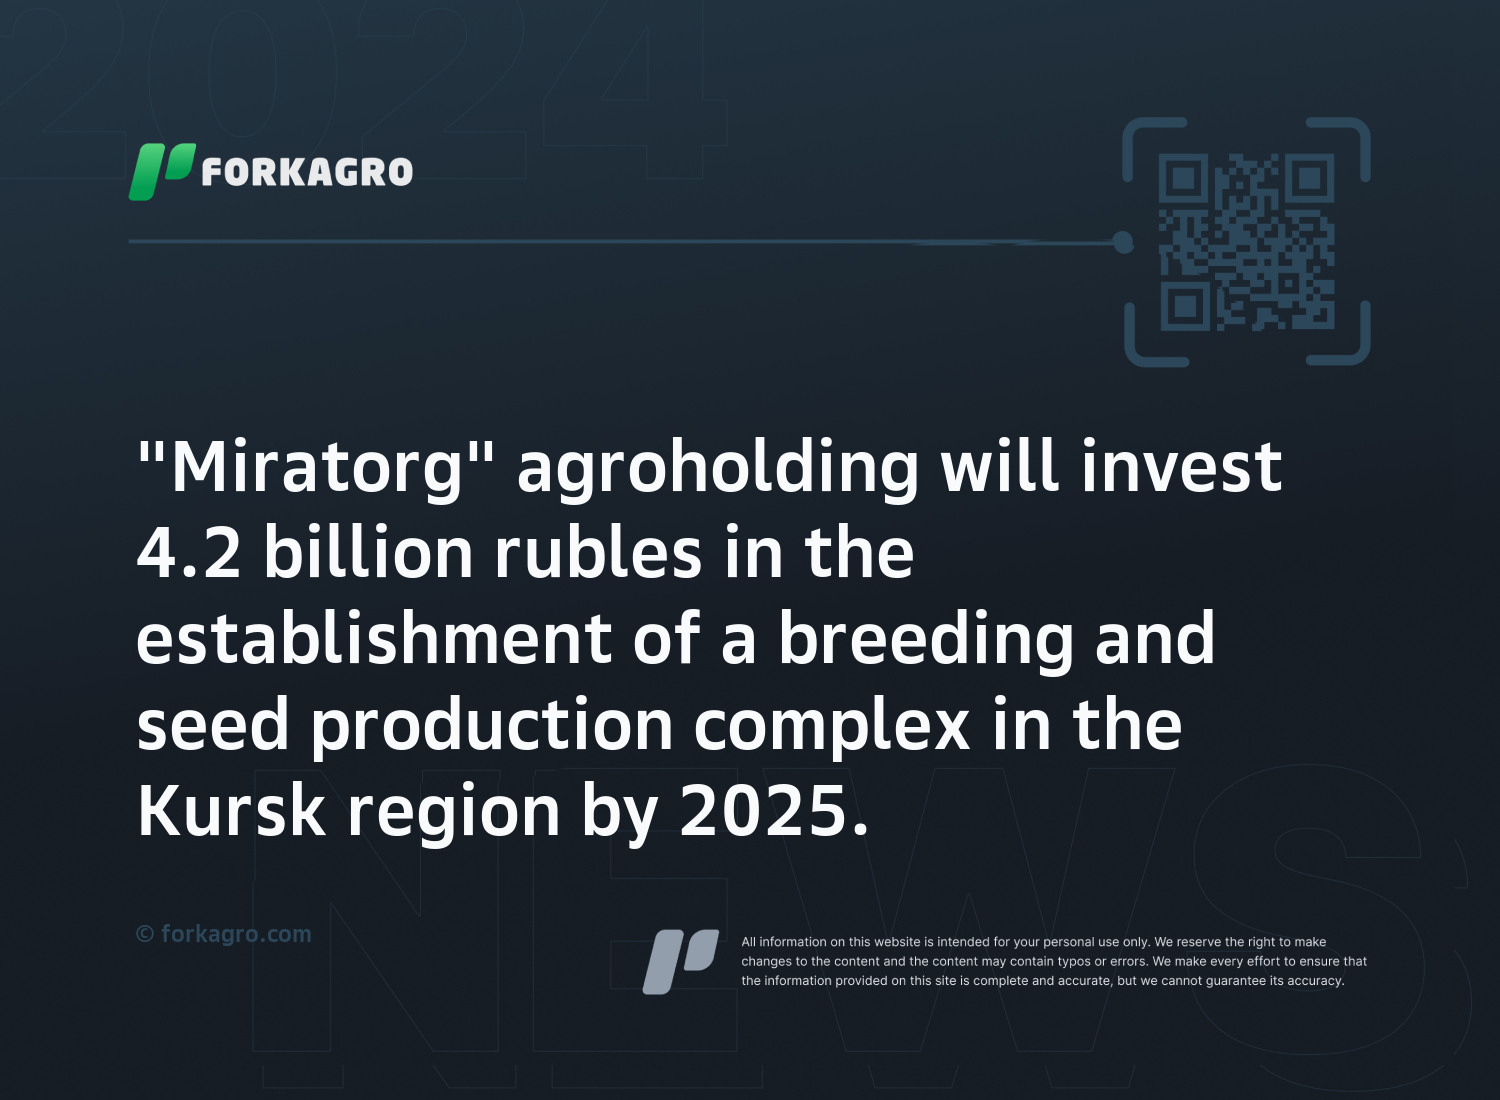 "Miratorg" agroholding will invest 4.2 billion rubles in the establishment of a breeding and seed production complex in the Kursk region by 2025.